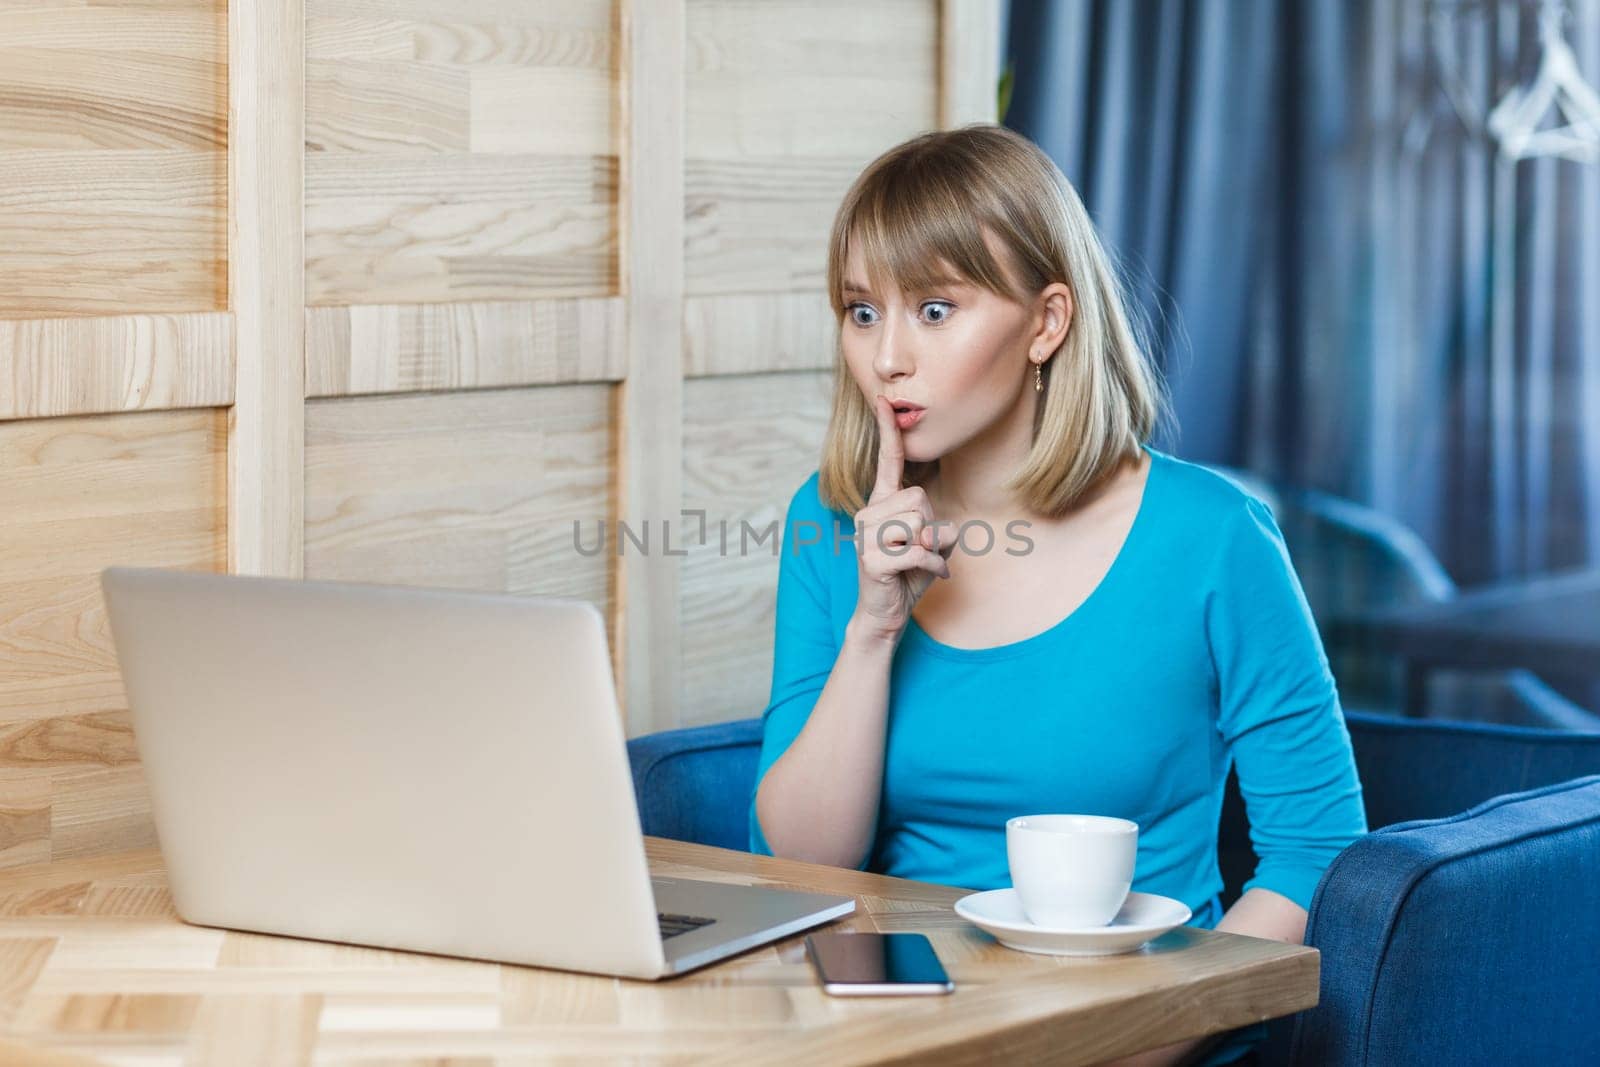 Portrait of serious adorable young woman with blonde hair in blue shirt sitting at table and working on laptop, has video call, showing shh gesture. Indoor shot, cafe background.